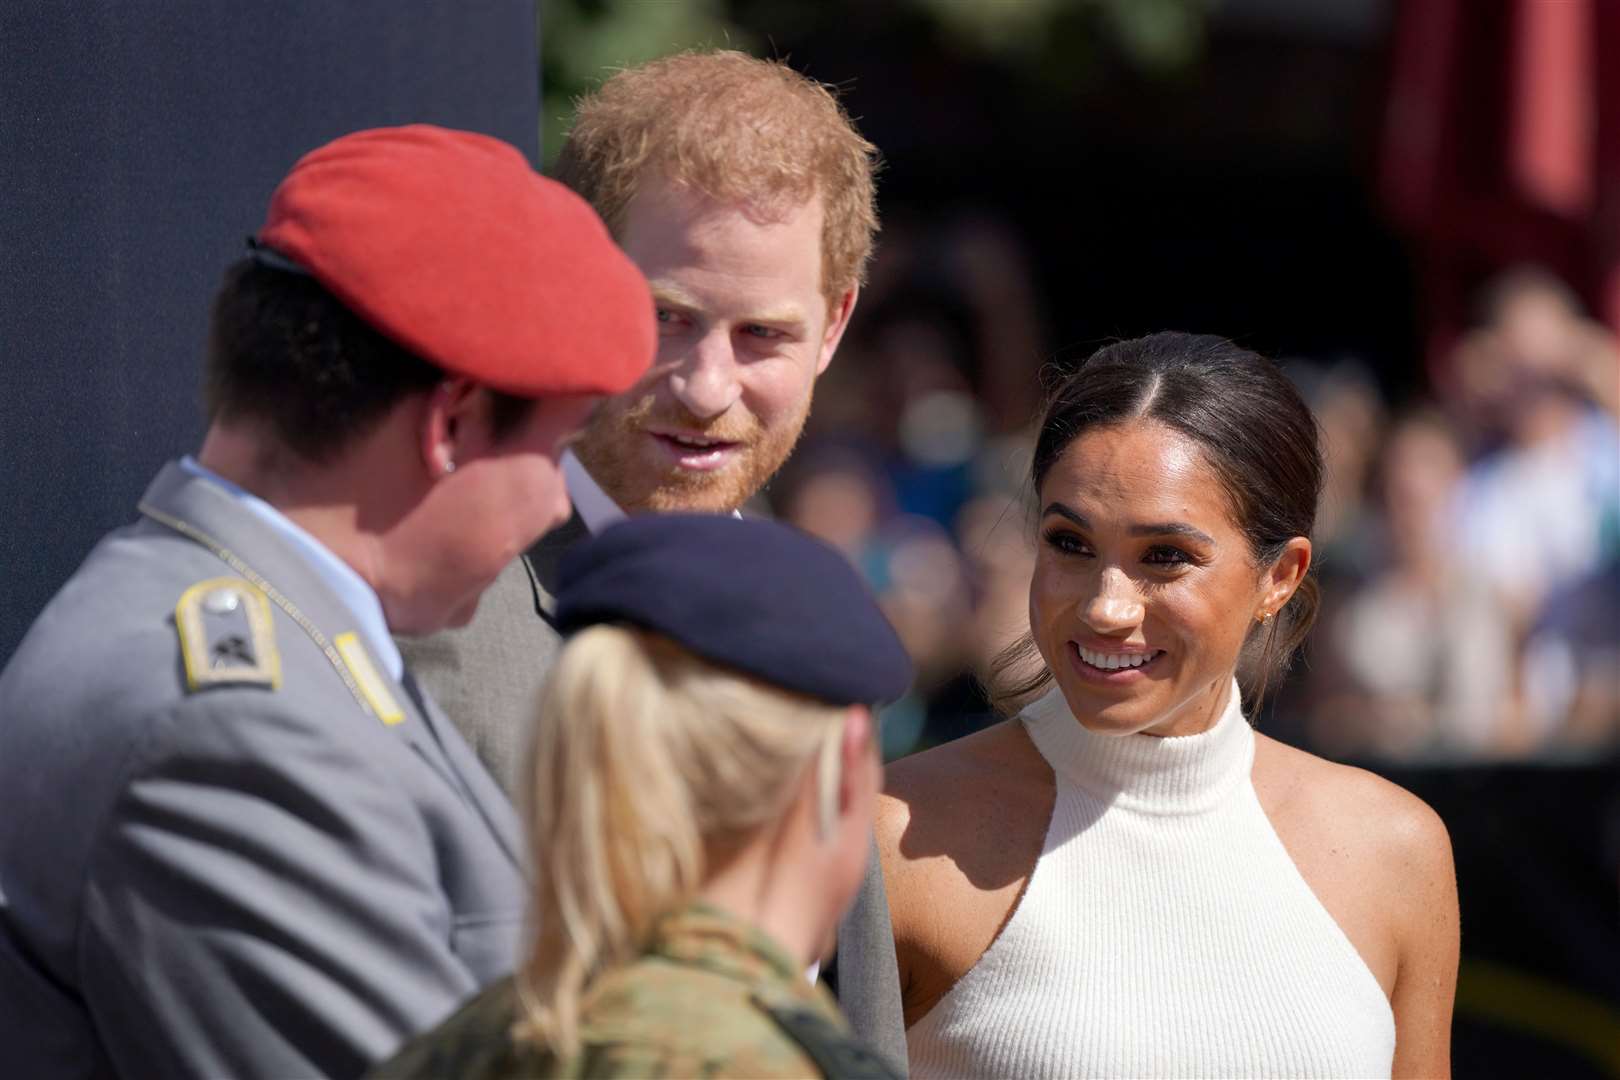 The Duke and Duchess of Sussex arrive at City Hall in Dusseldorf, Germany (Joe Giddens/PA)